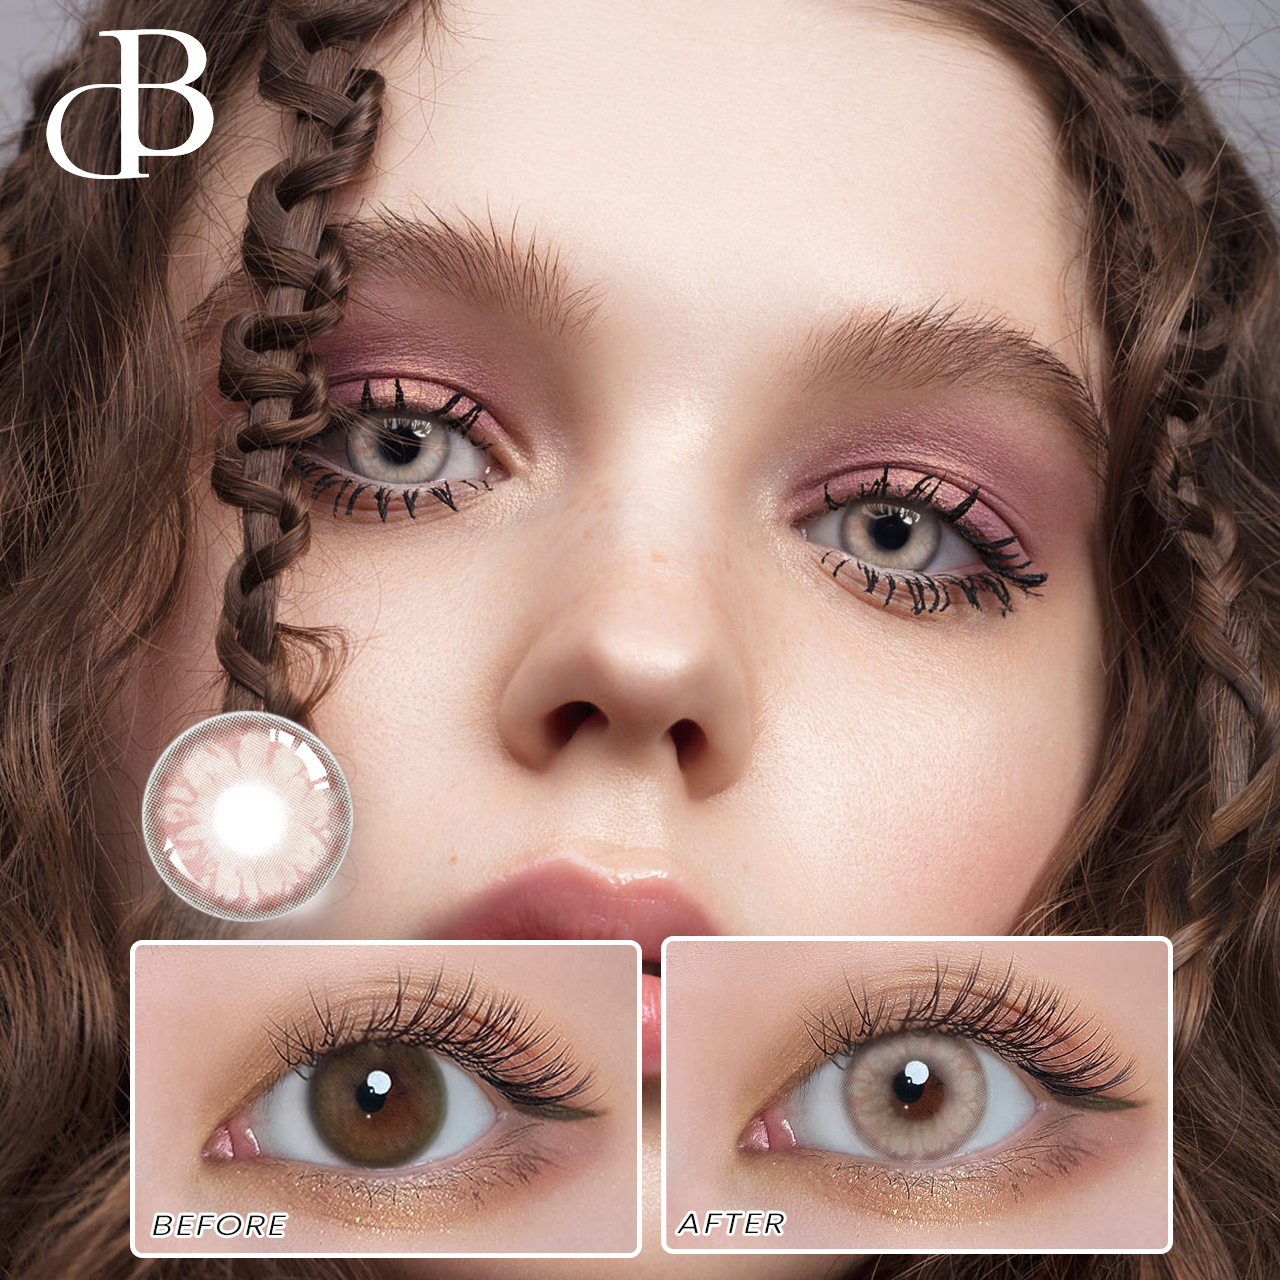 DB Yearly color sensual beauty lenses branclear color contact lenses